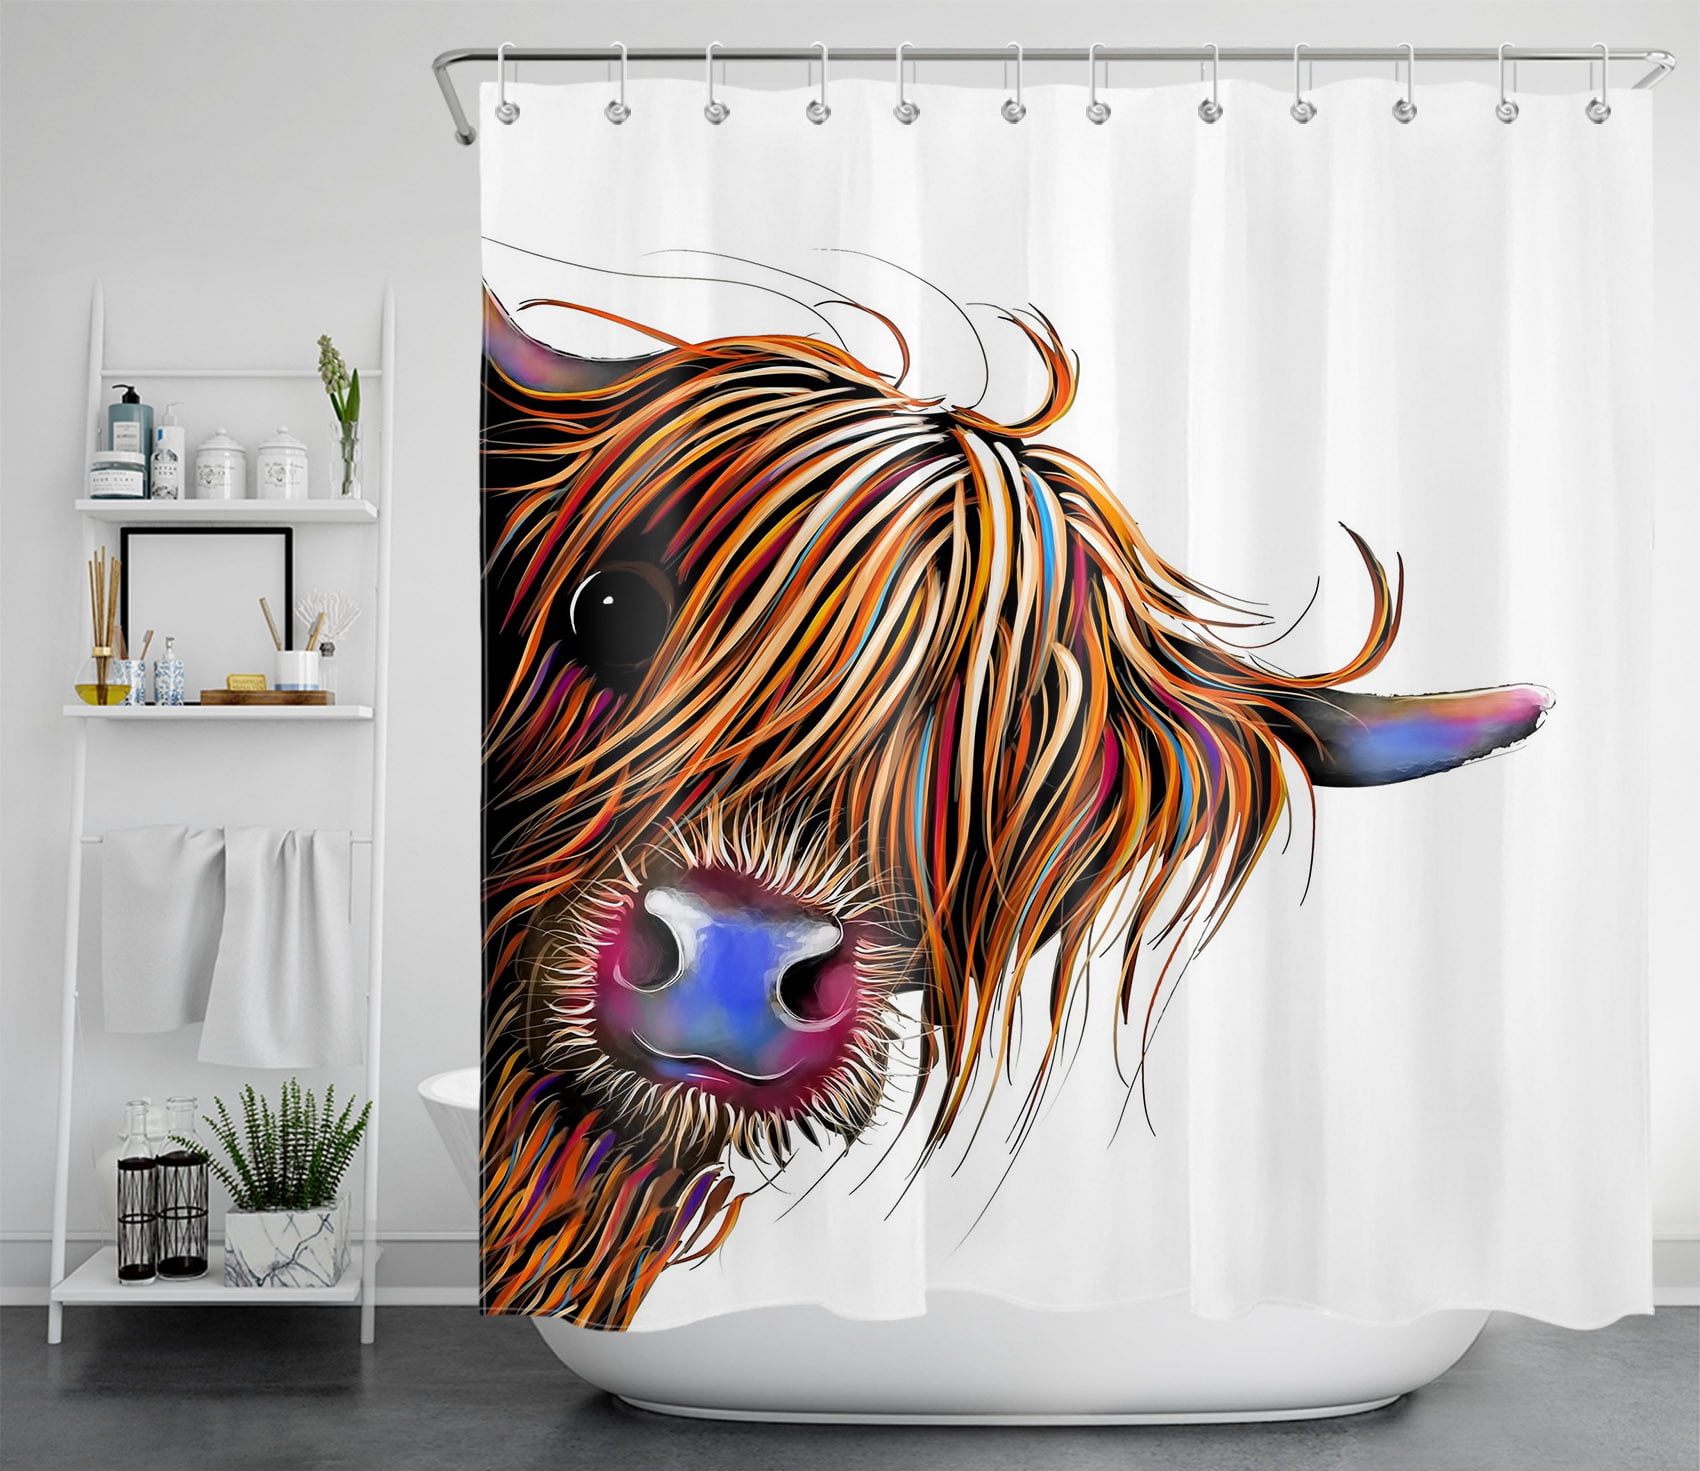 Colorful Cow Shower Curtain Set 71" Bathroom Waterproof Fabric Curtains & Hooks 